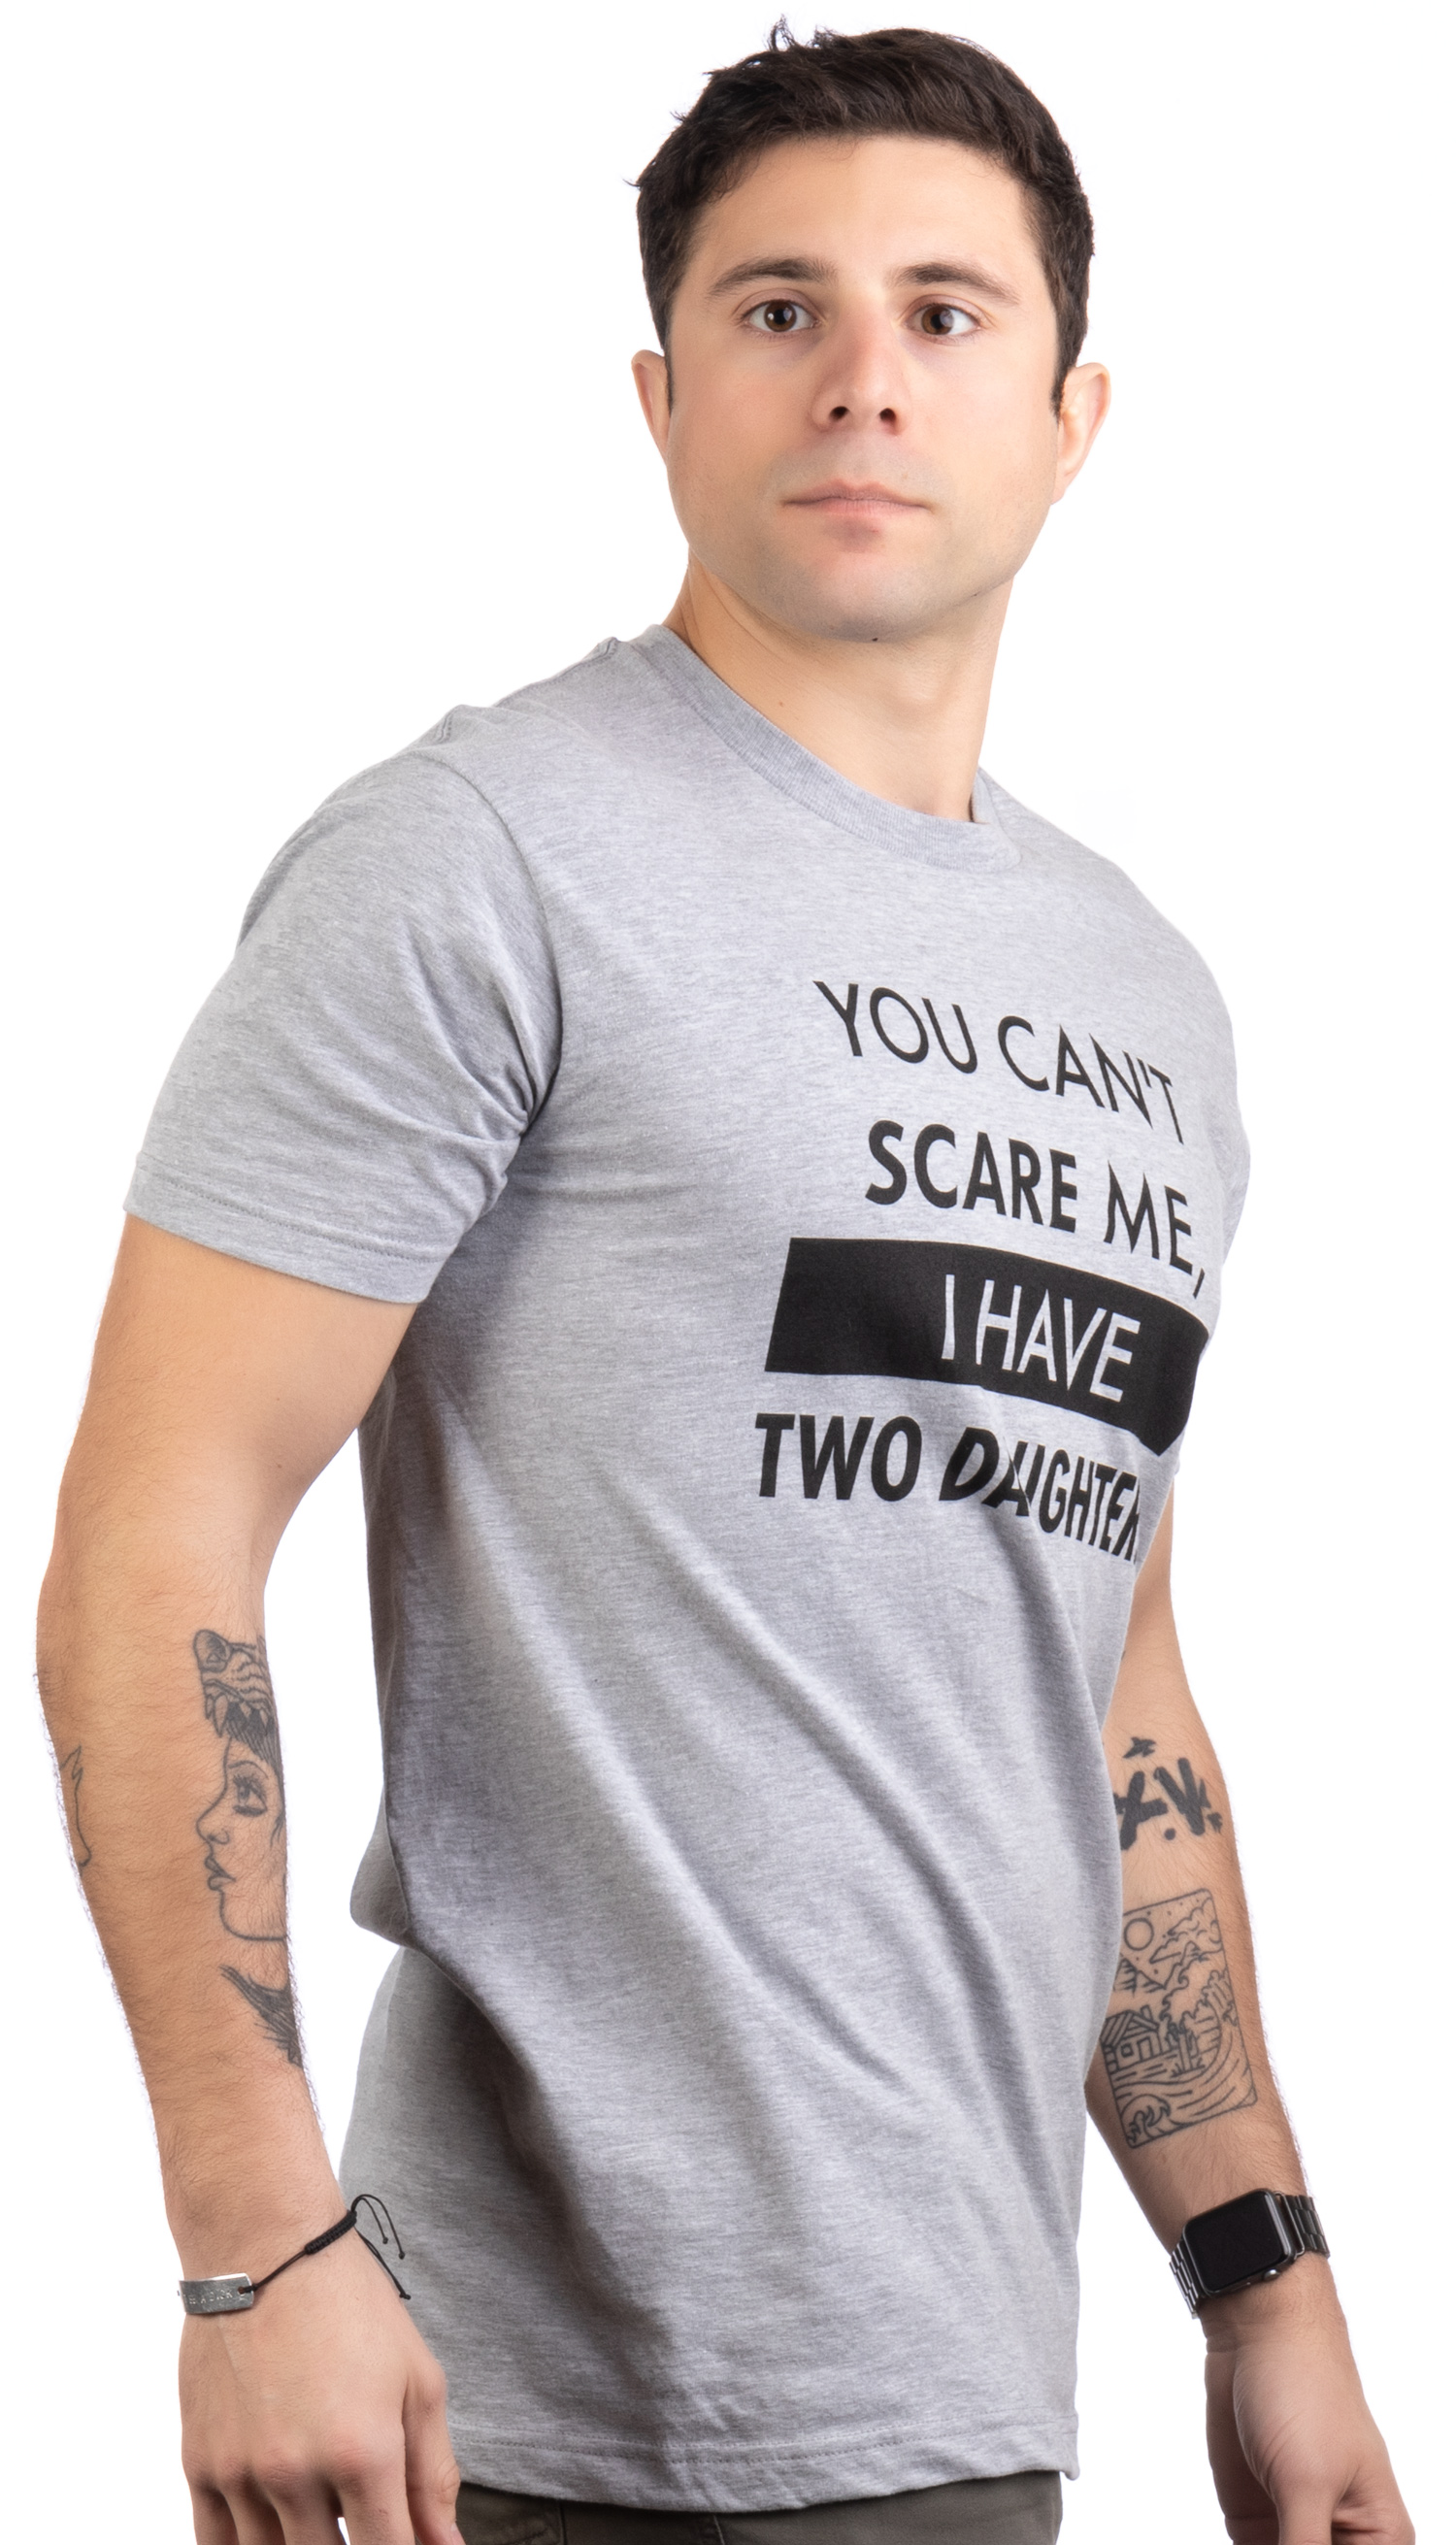 You Can't Scare Me, I Have Two Daughters - Funny Dad Joke, Father T-Shirt - image 5 of 6